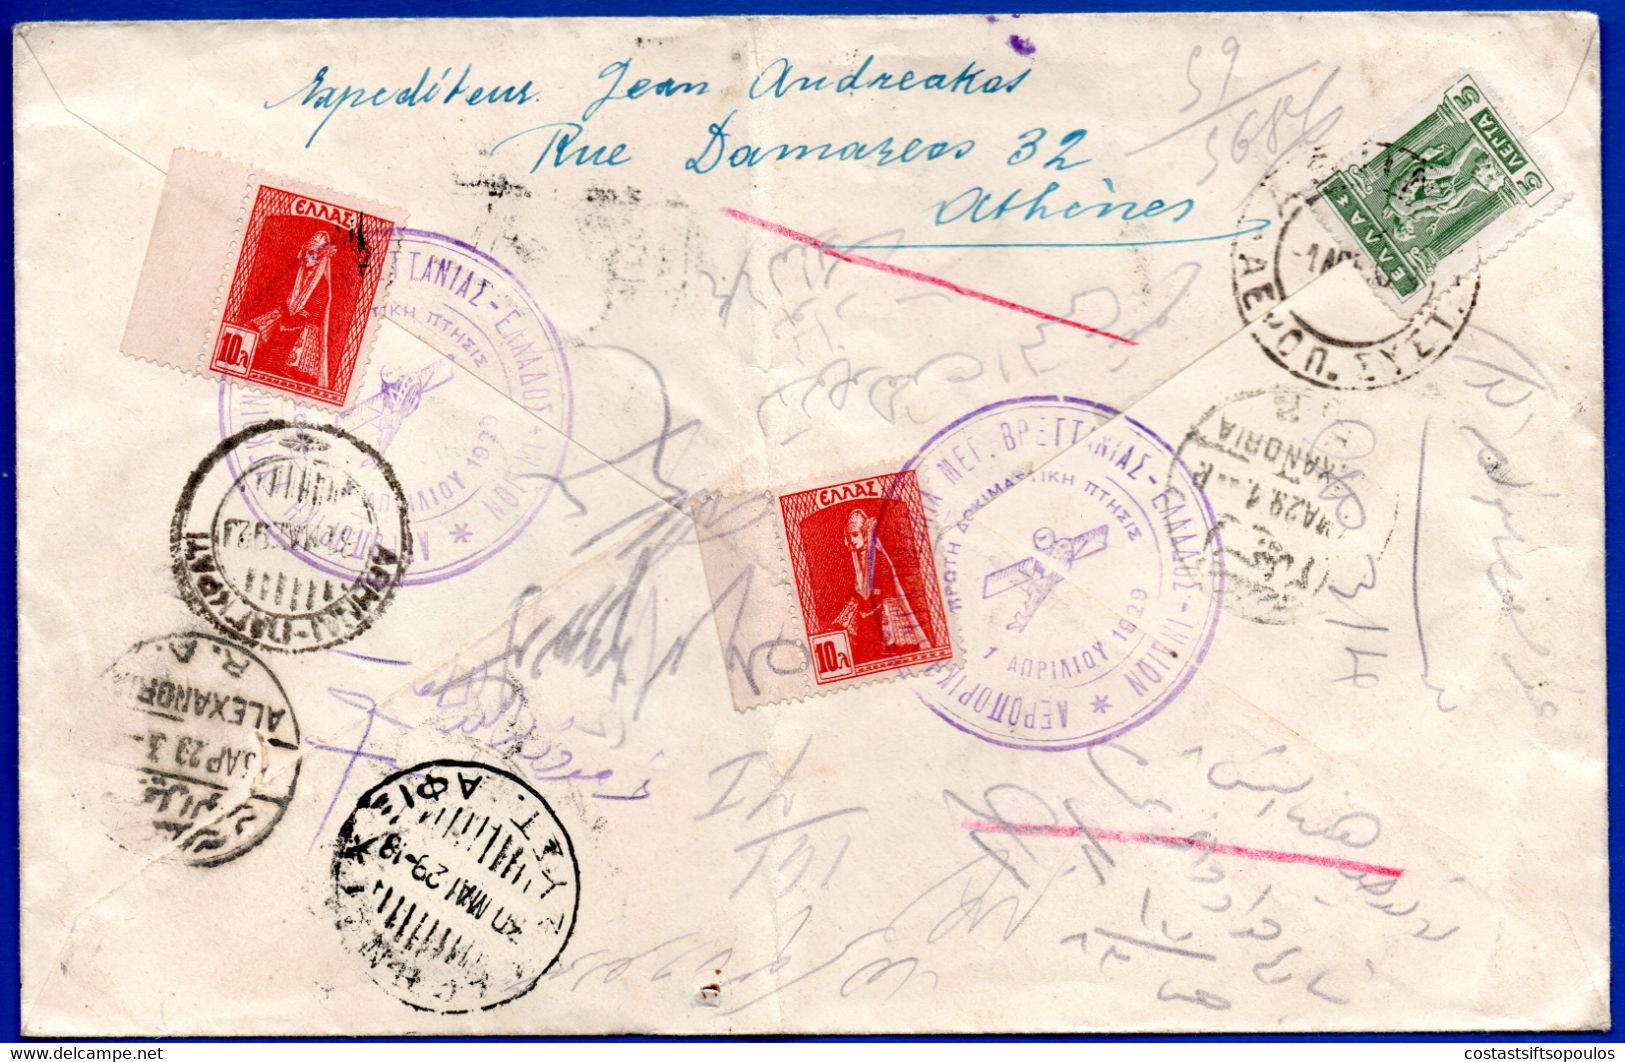 671.1929 ATHENS-ALEXANDRIA 1st. FLIGHT MULTIFRANKED RETURNED COVER.IMPERIAL AIRWAYS GB-GREECE-INDIA FOLDED VERTICALLY - Briefe U. Dokumente